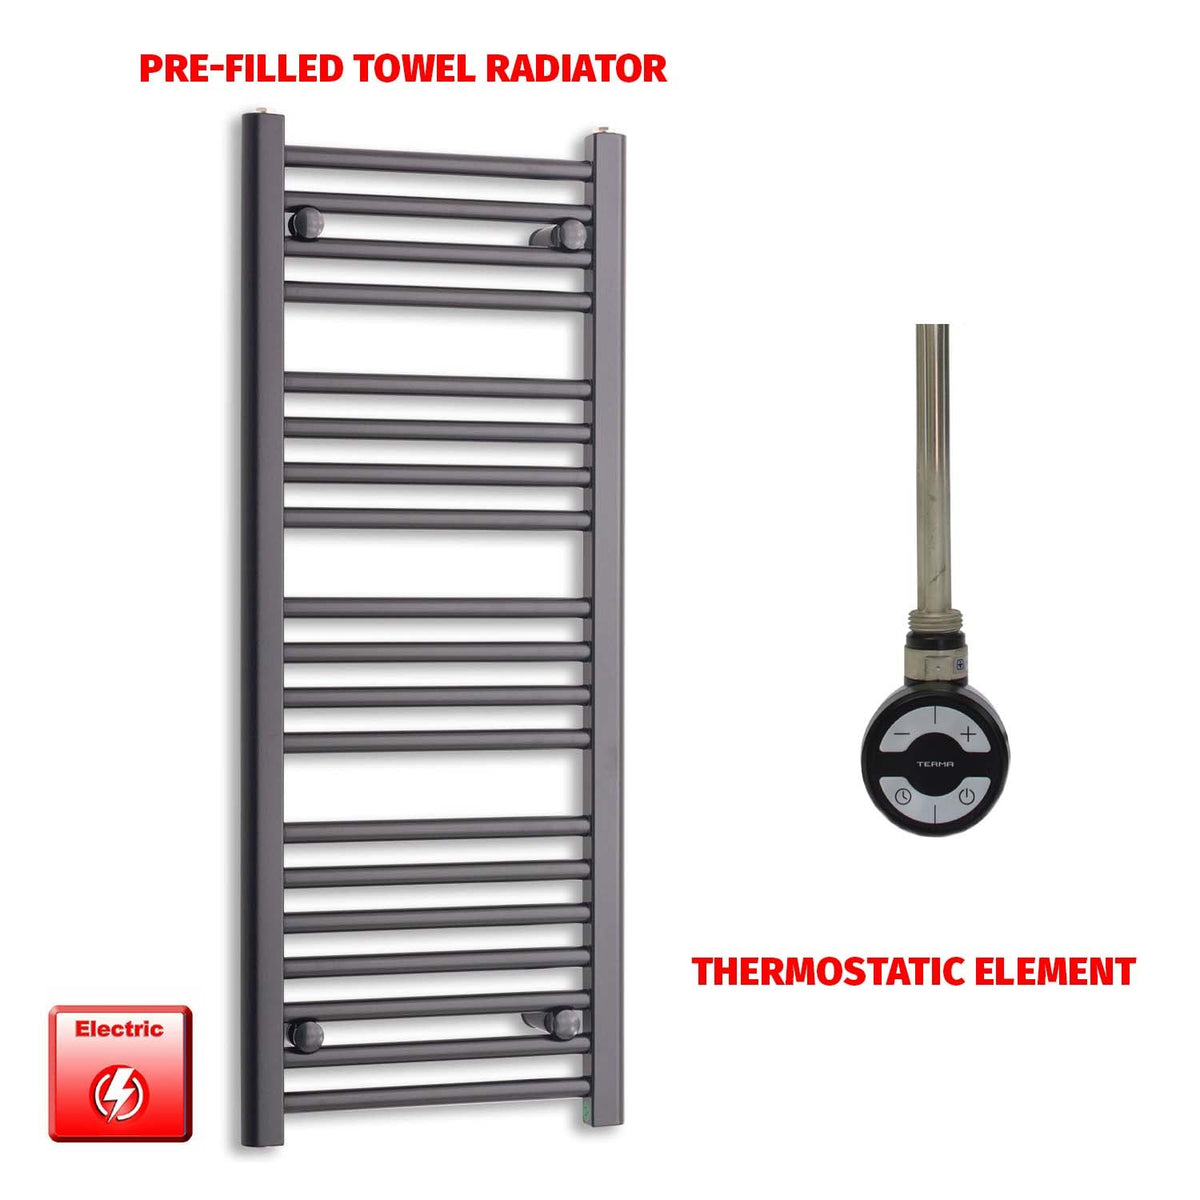 1000 x 400 Flat Black Pre-Filled Electric Heated Towel Radiator HTR MOA Thermostatic